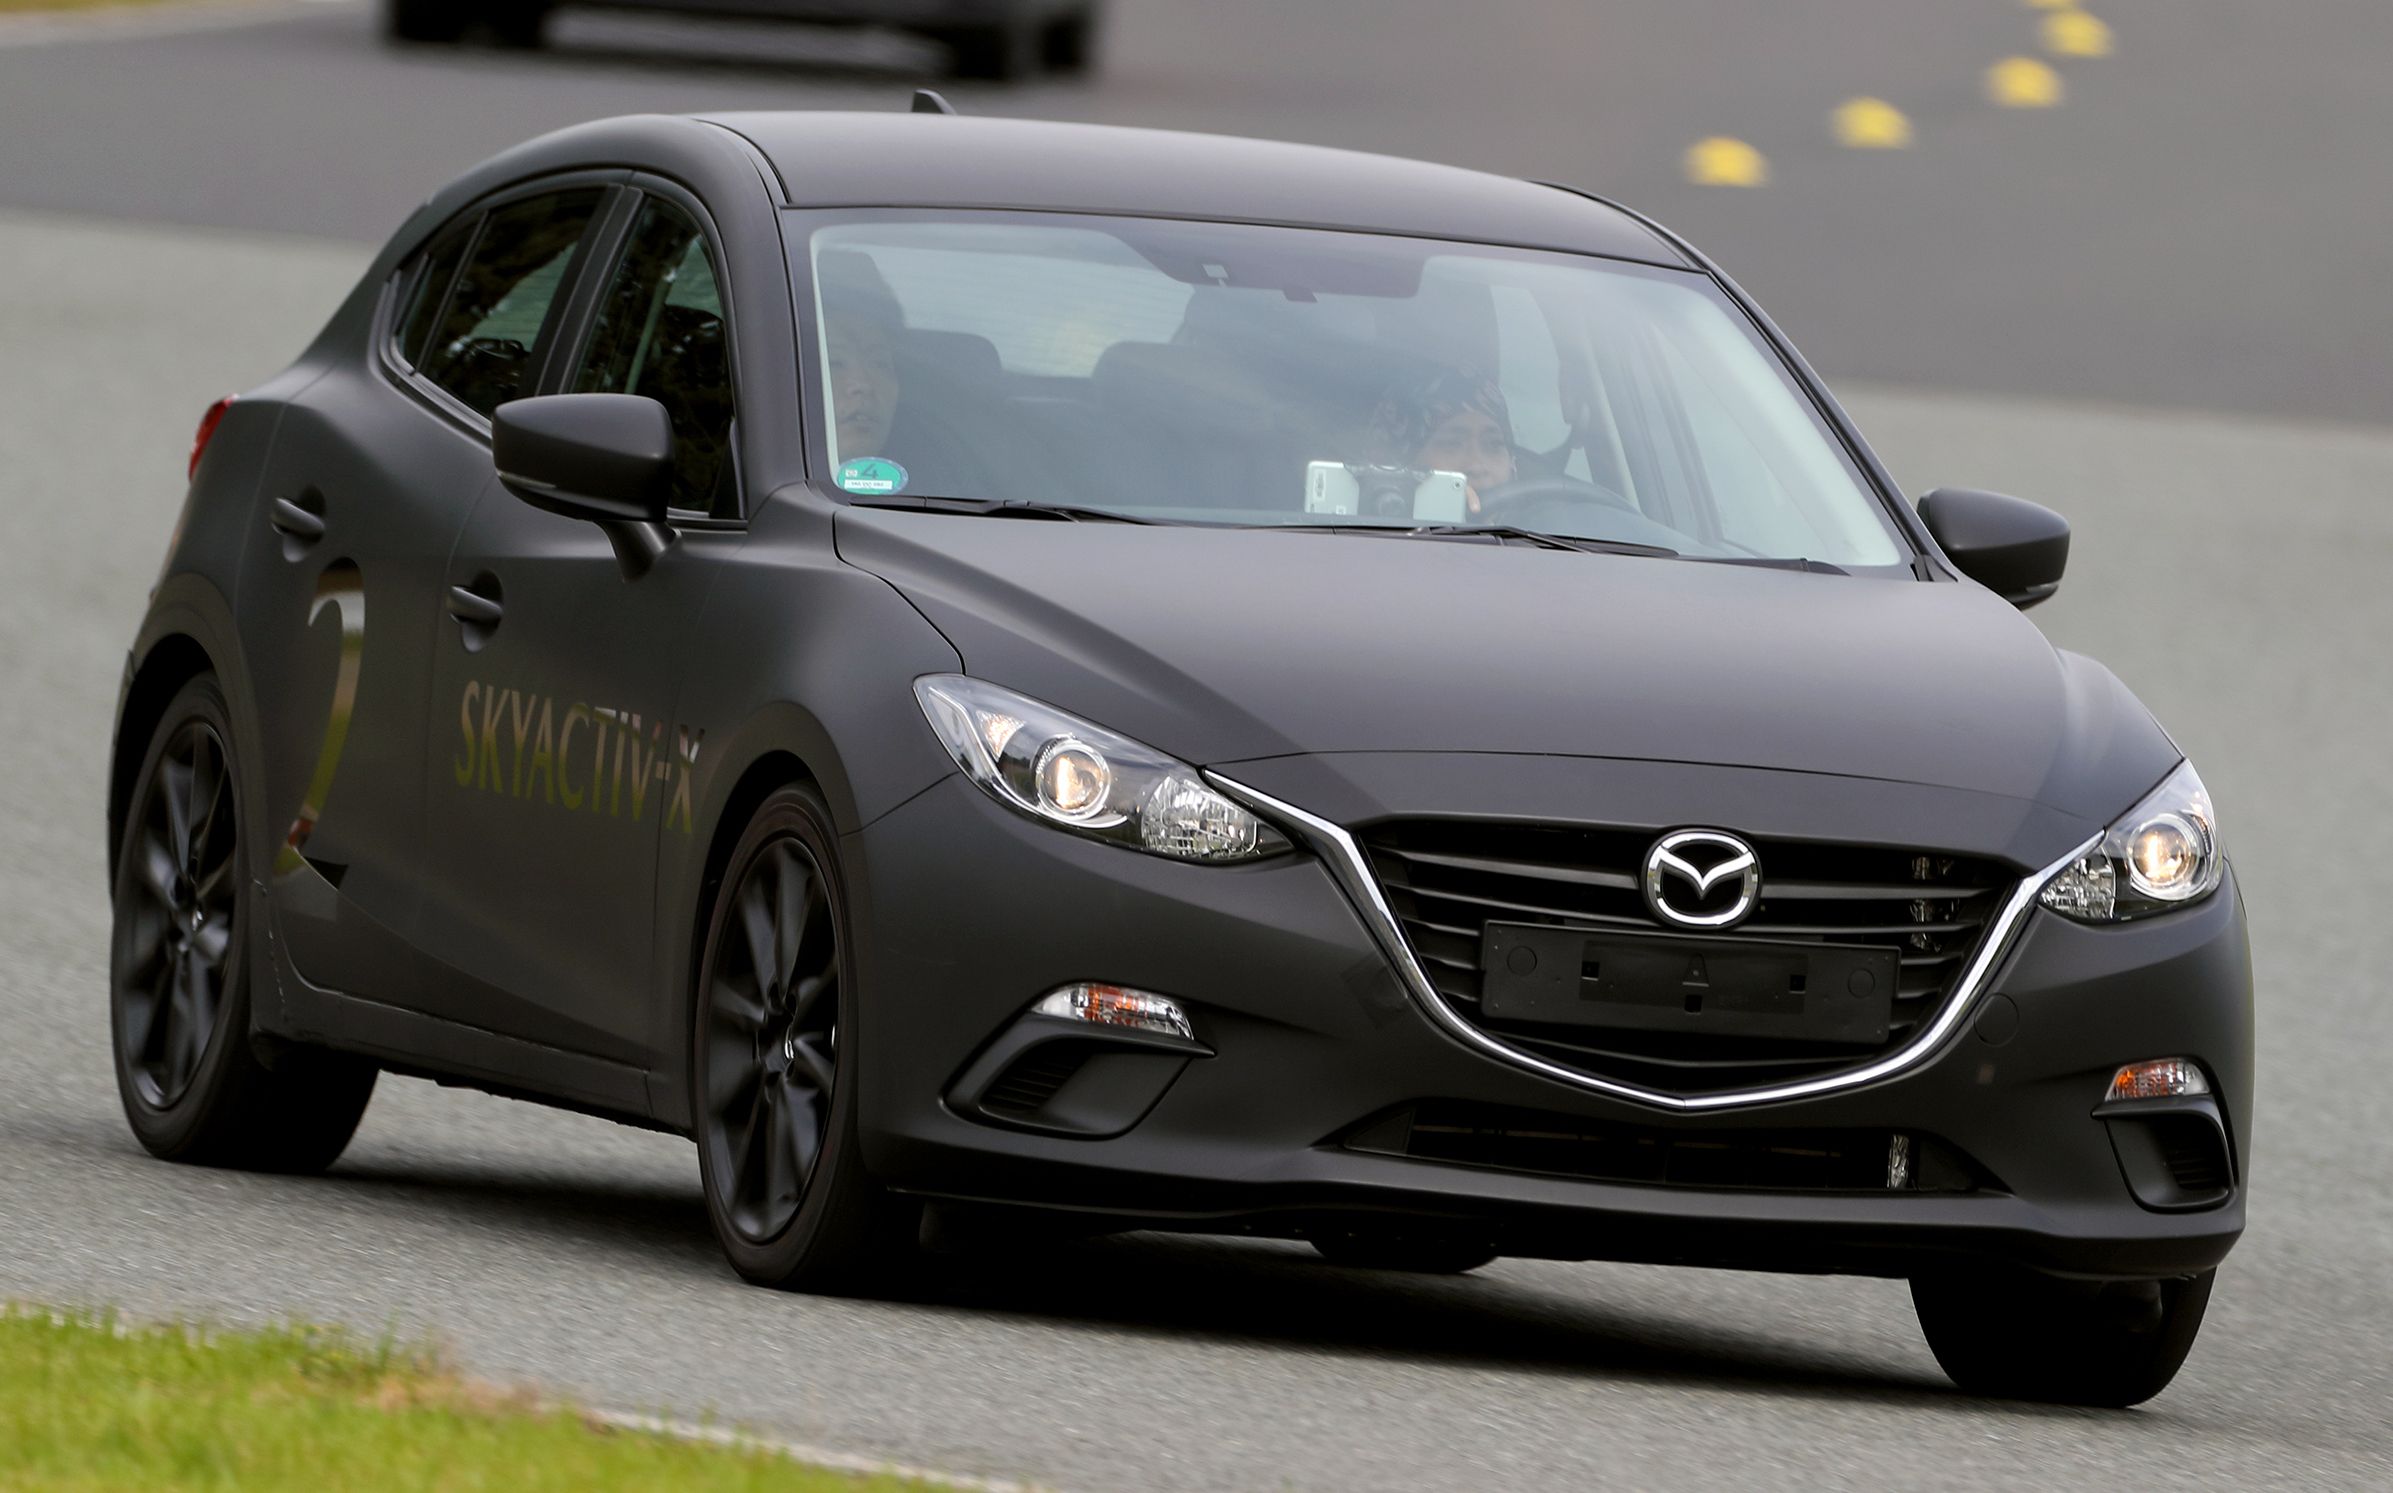 DRIVEN: 2019 Mazda 3 prototype with SkyActiv-X engine – is a high-tech petrol mill still relevant?